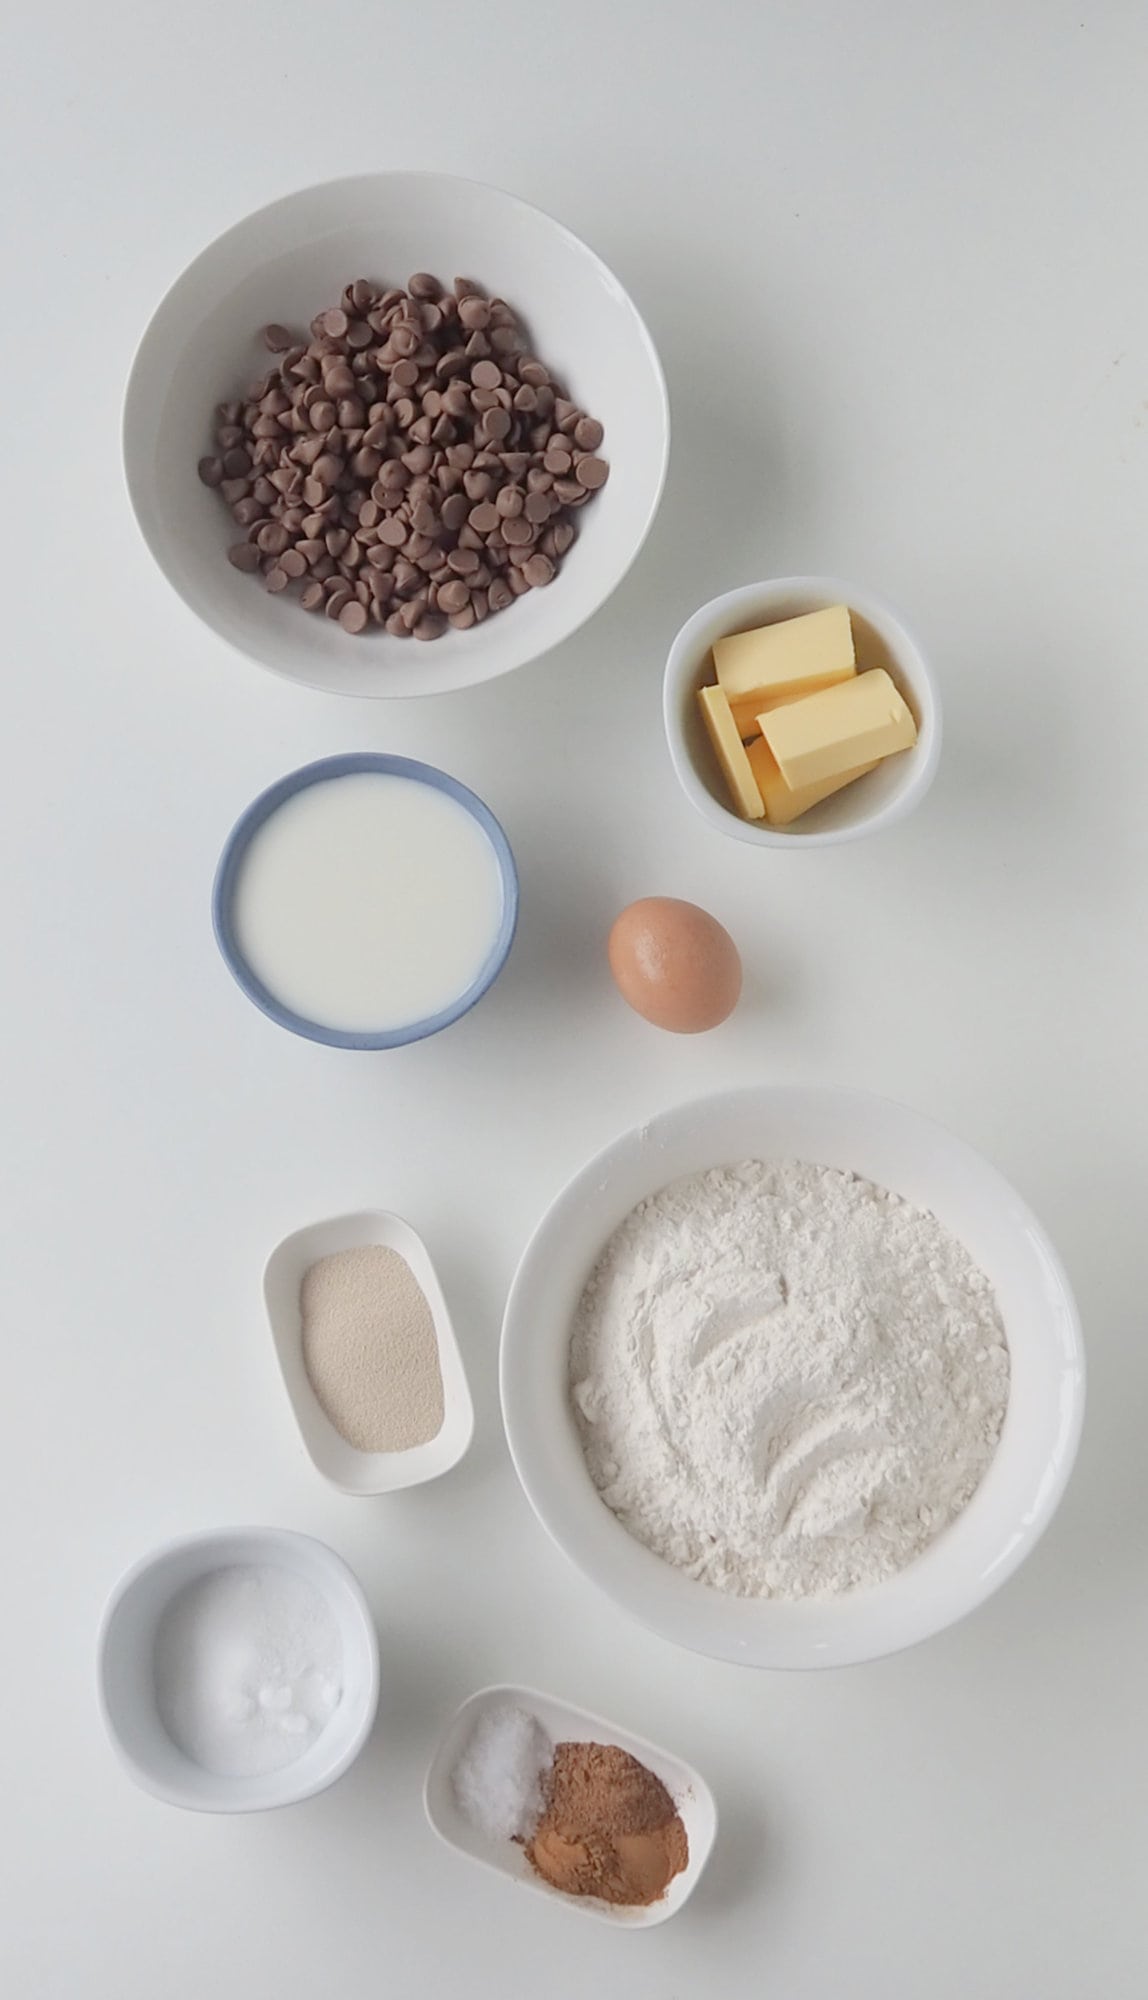 Ingredients to make Chocolate Chip Hot Cross Buns.